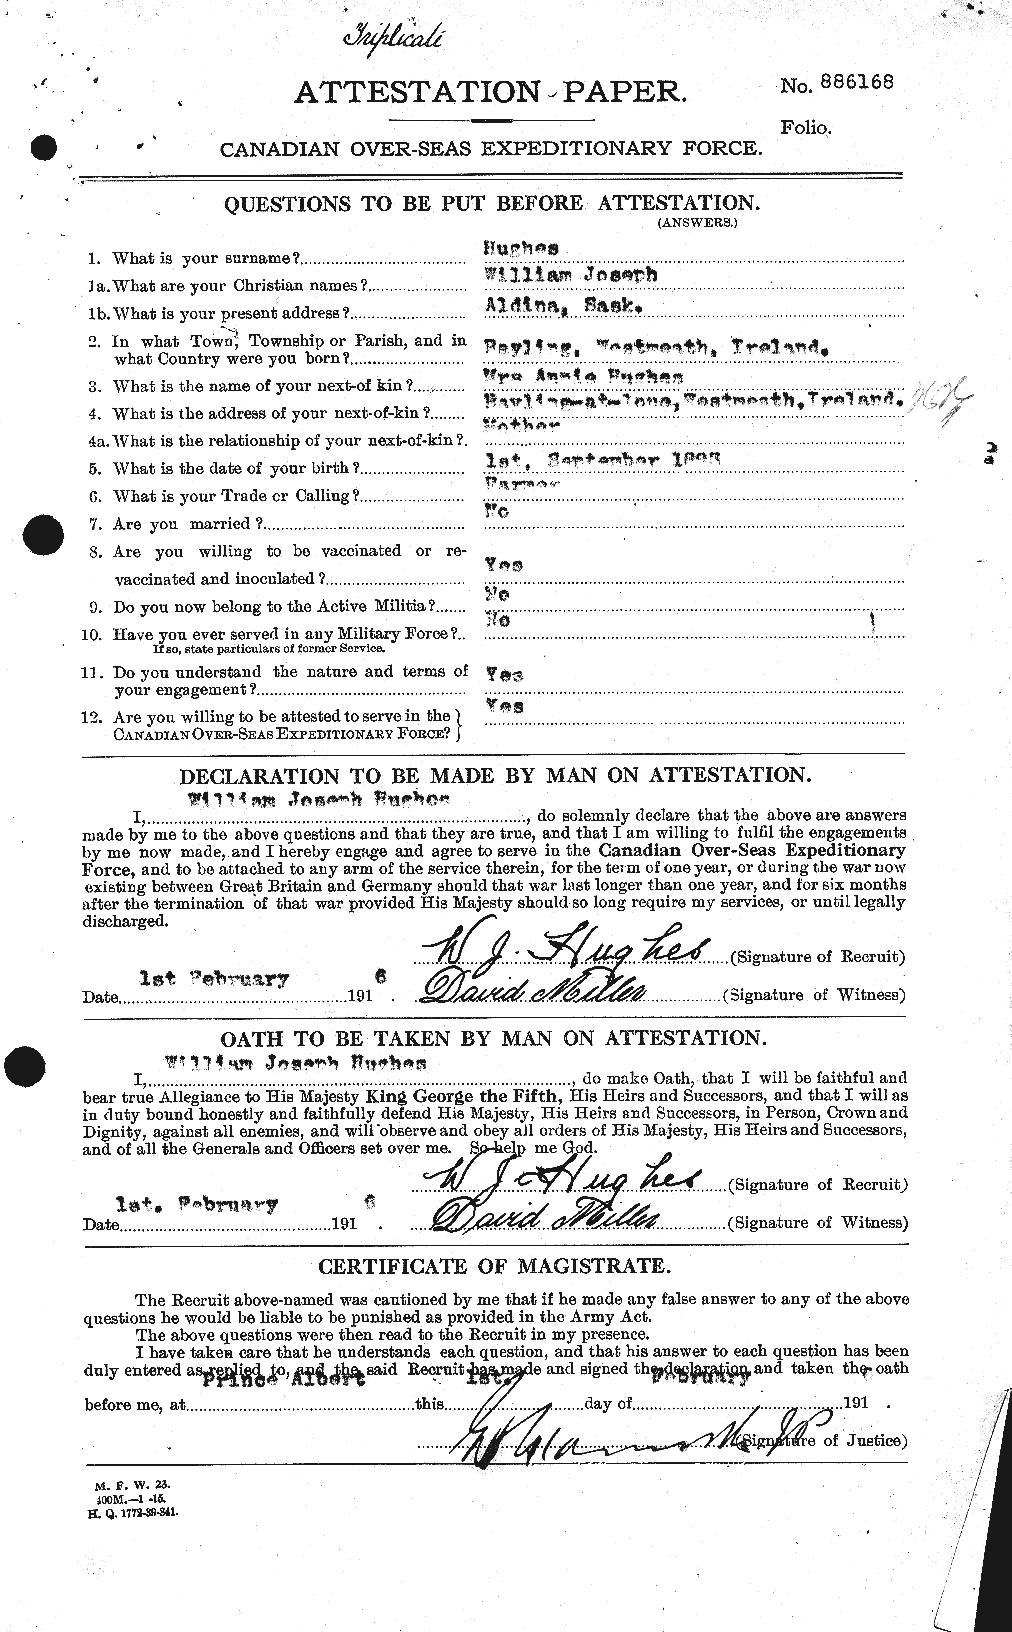 Personnel Records of the First World War - CEF 405948a